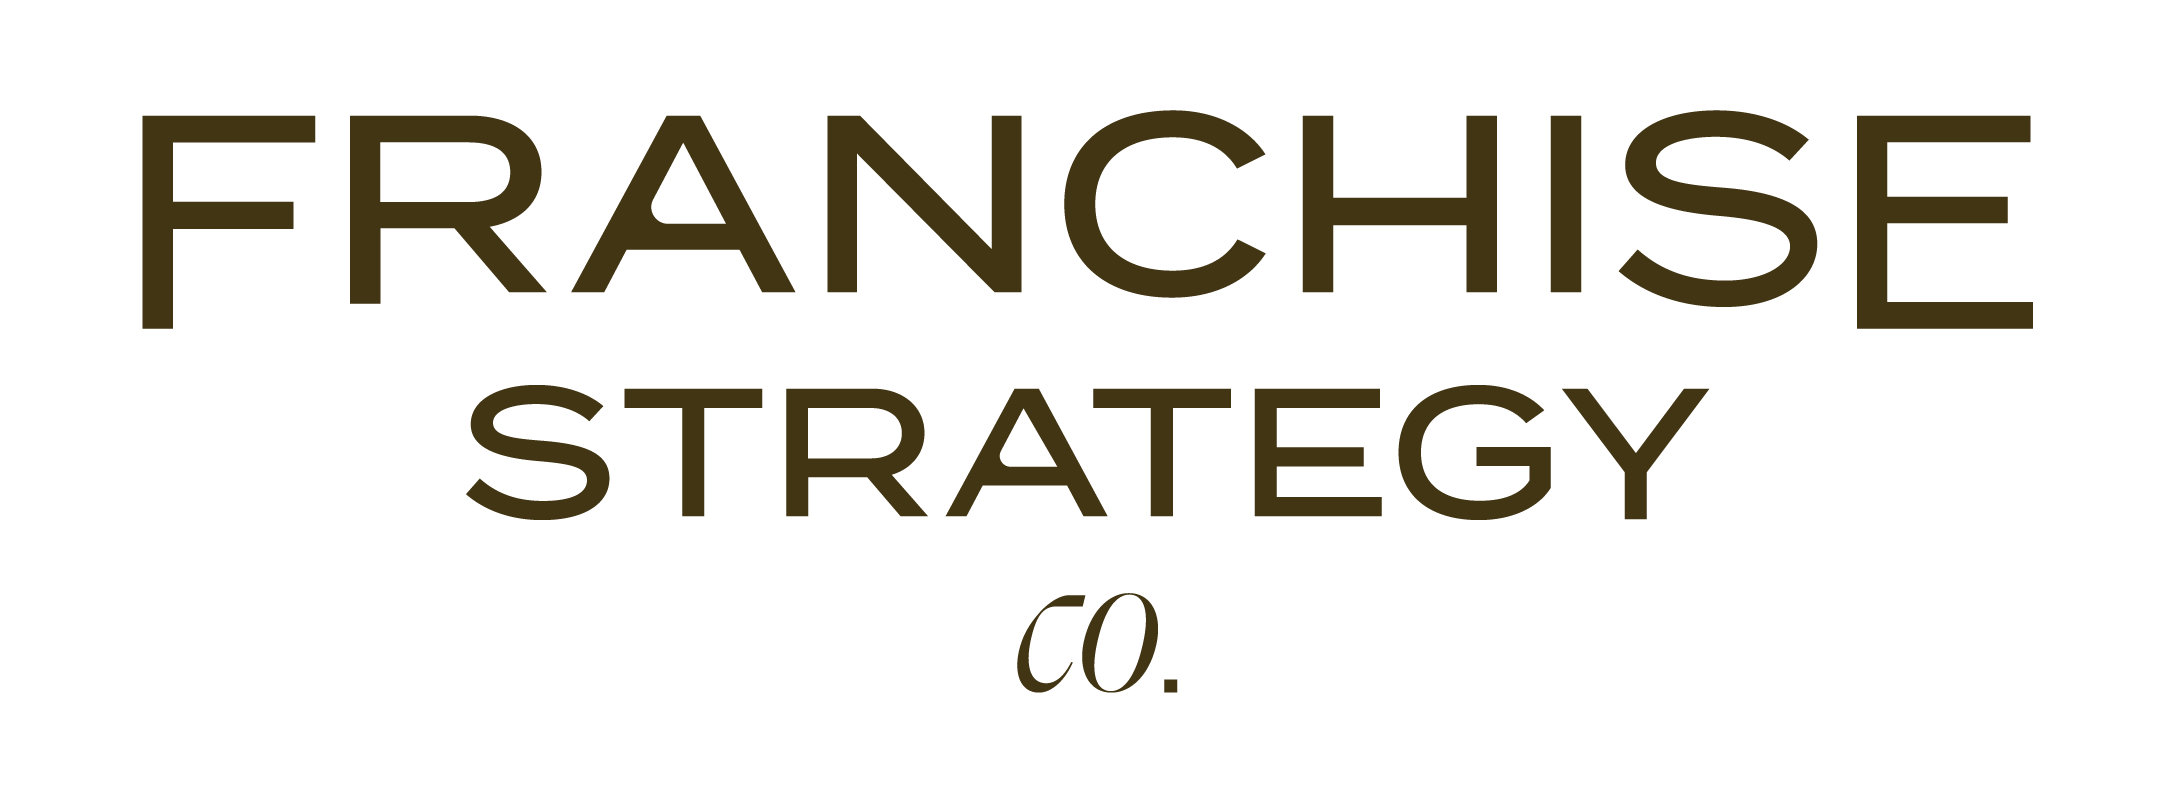 Franchise Strategy Consulting